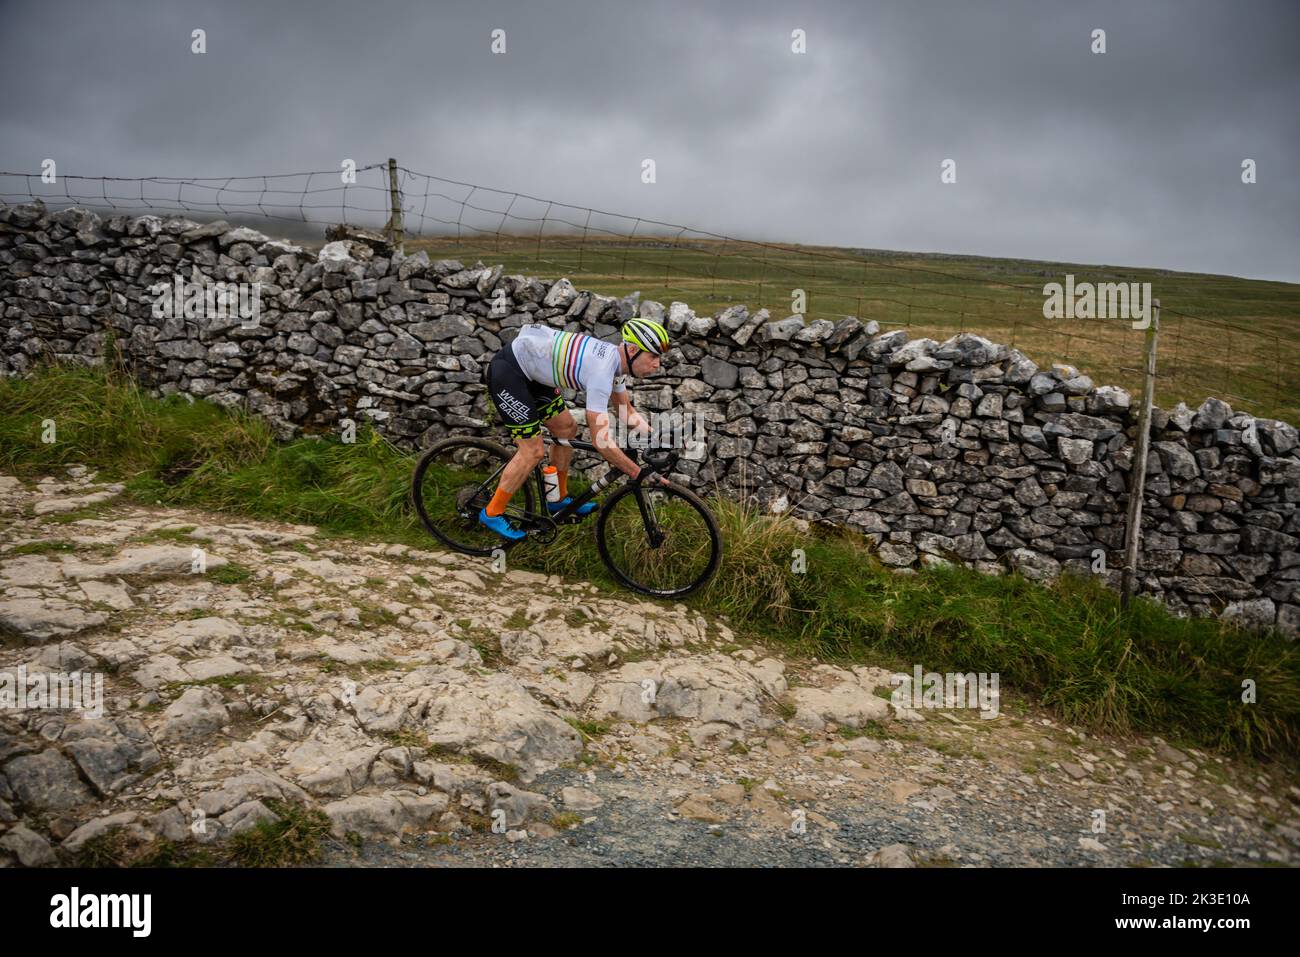 World Champion, Lewis Craven, Wheelbase cabtech Castelli, 3 Peaks cyclocross, Horton in Ribblesdale, Yorkshire Dales, UK. Stock Photo